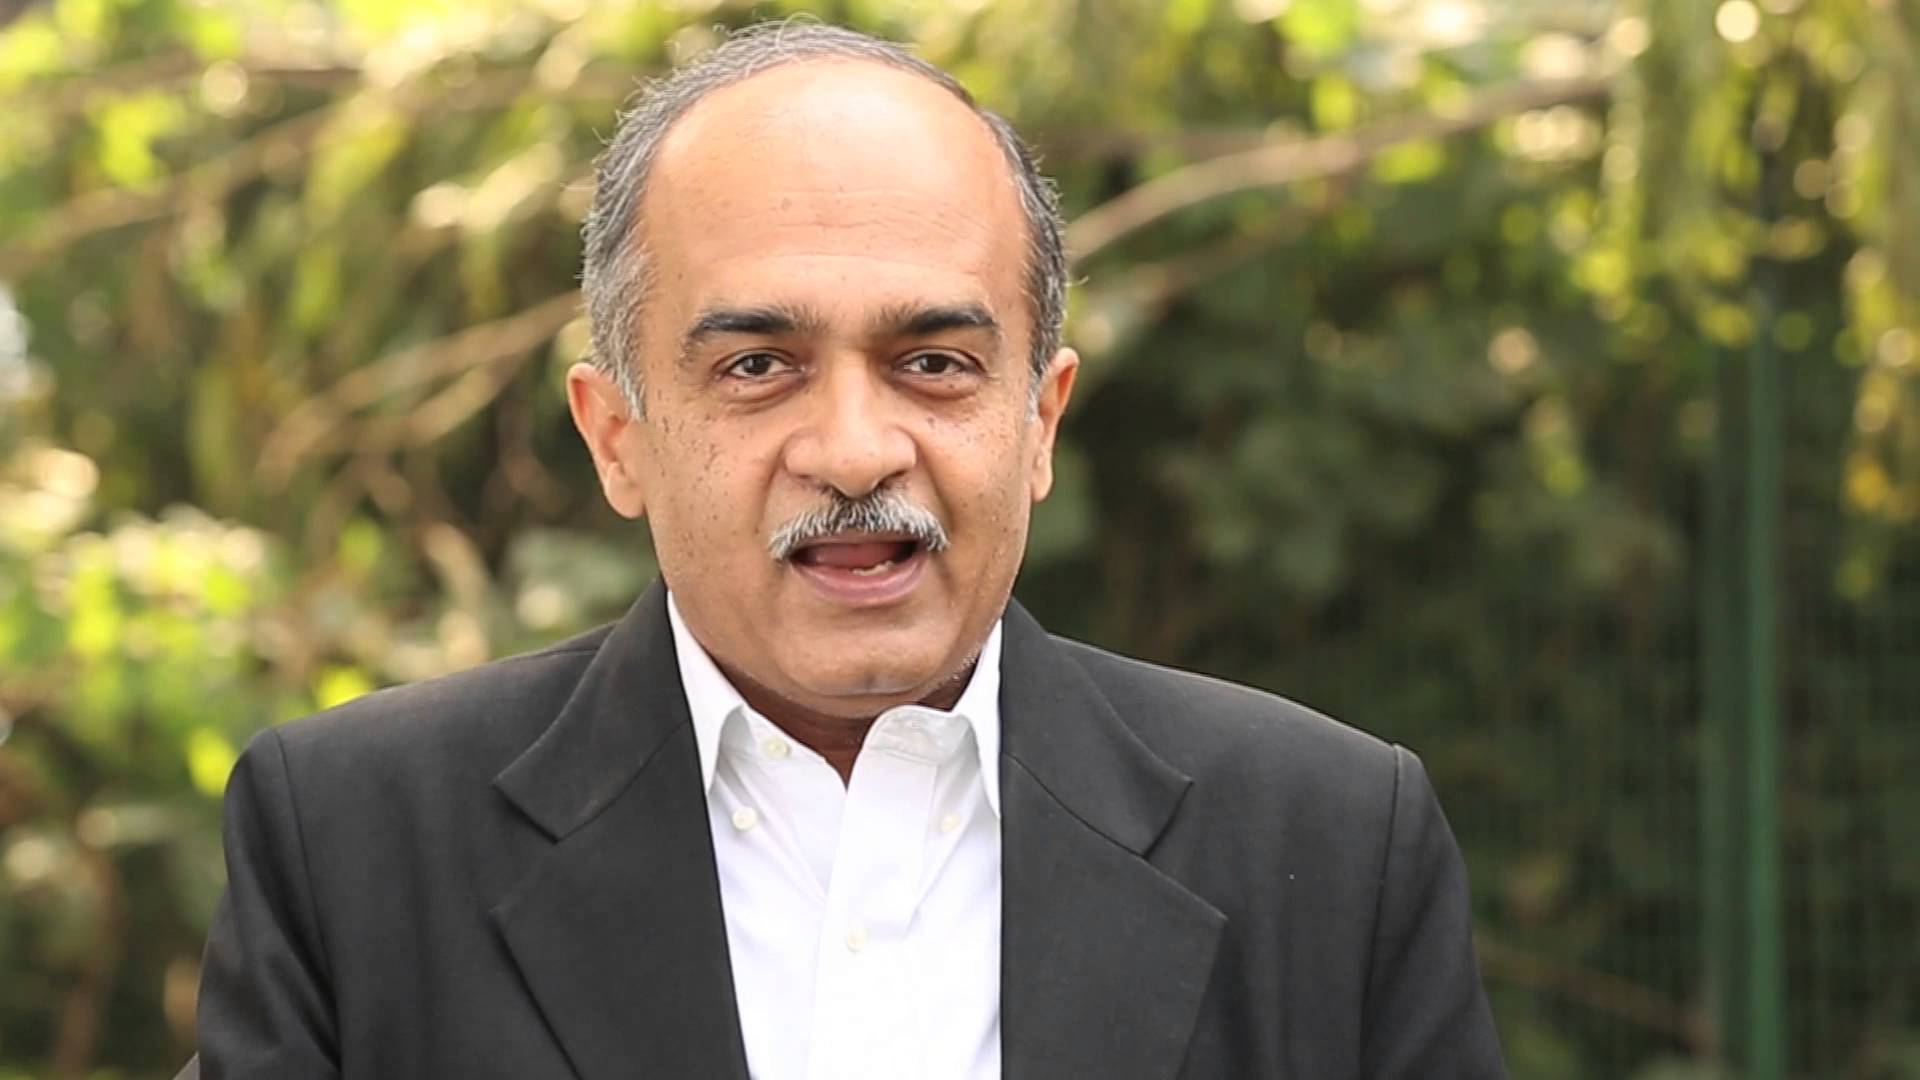 HAL's image dashed due to central government: Prashant Bhushan